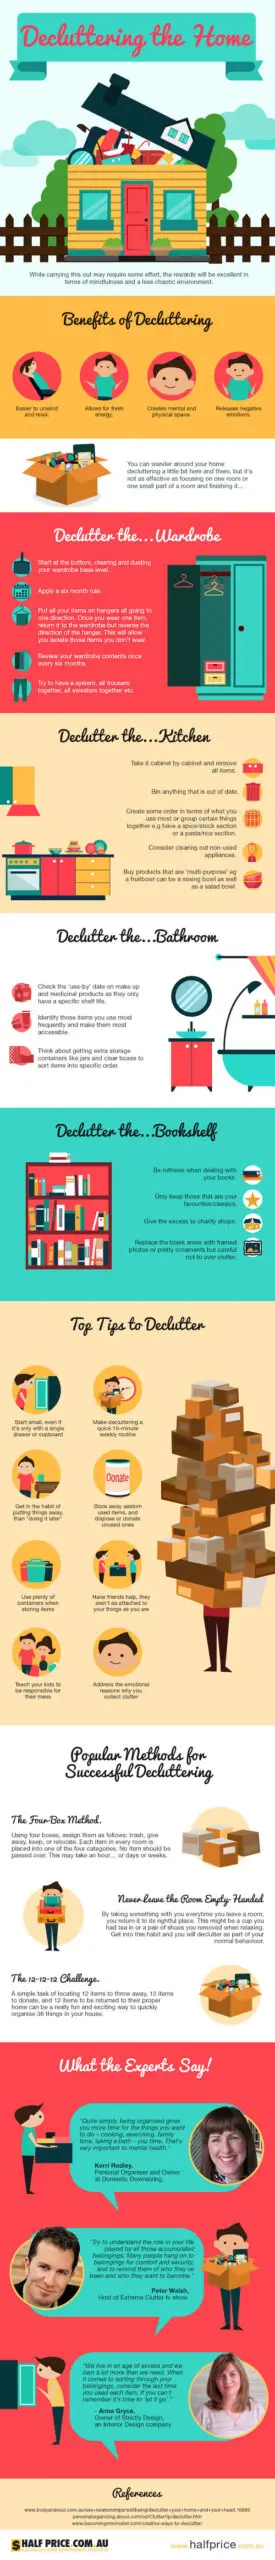 https://www.homejelly.com/wp-content/uploads/2015/09/Home-Declutter-Infographic-scaled.jpg